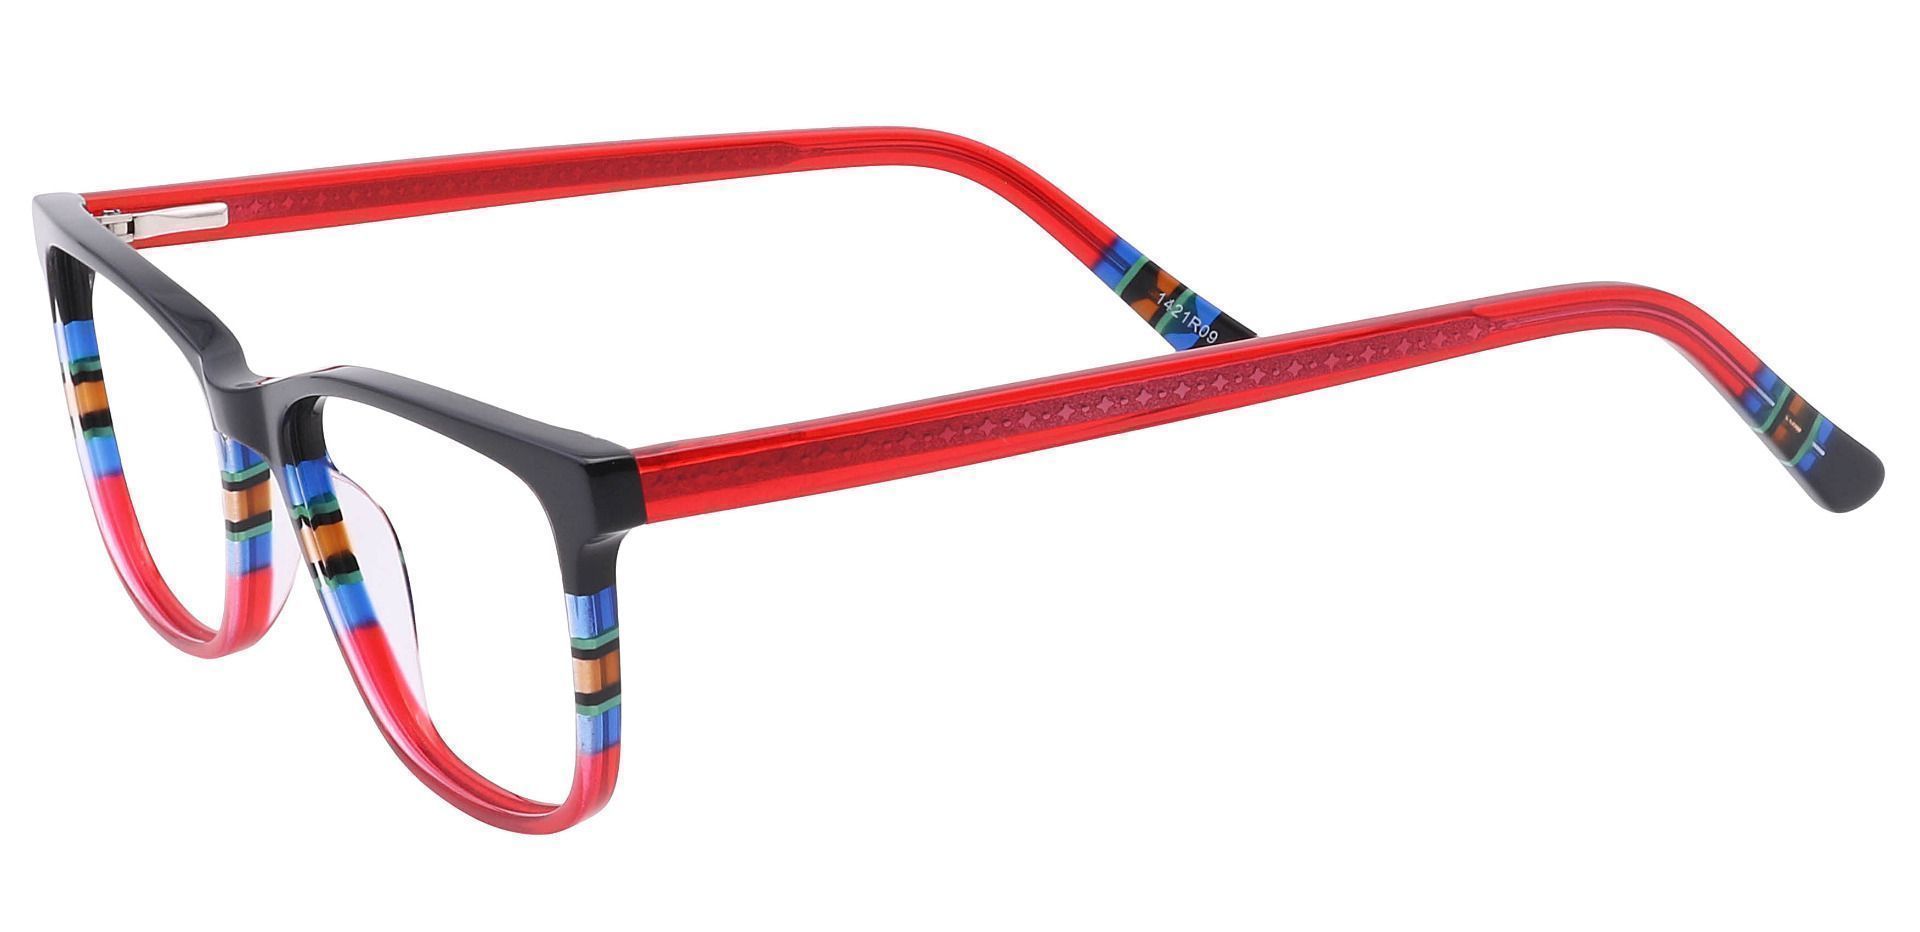 Taffie Oval Non-Rx Glasses - Red